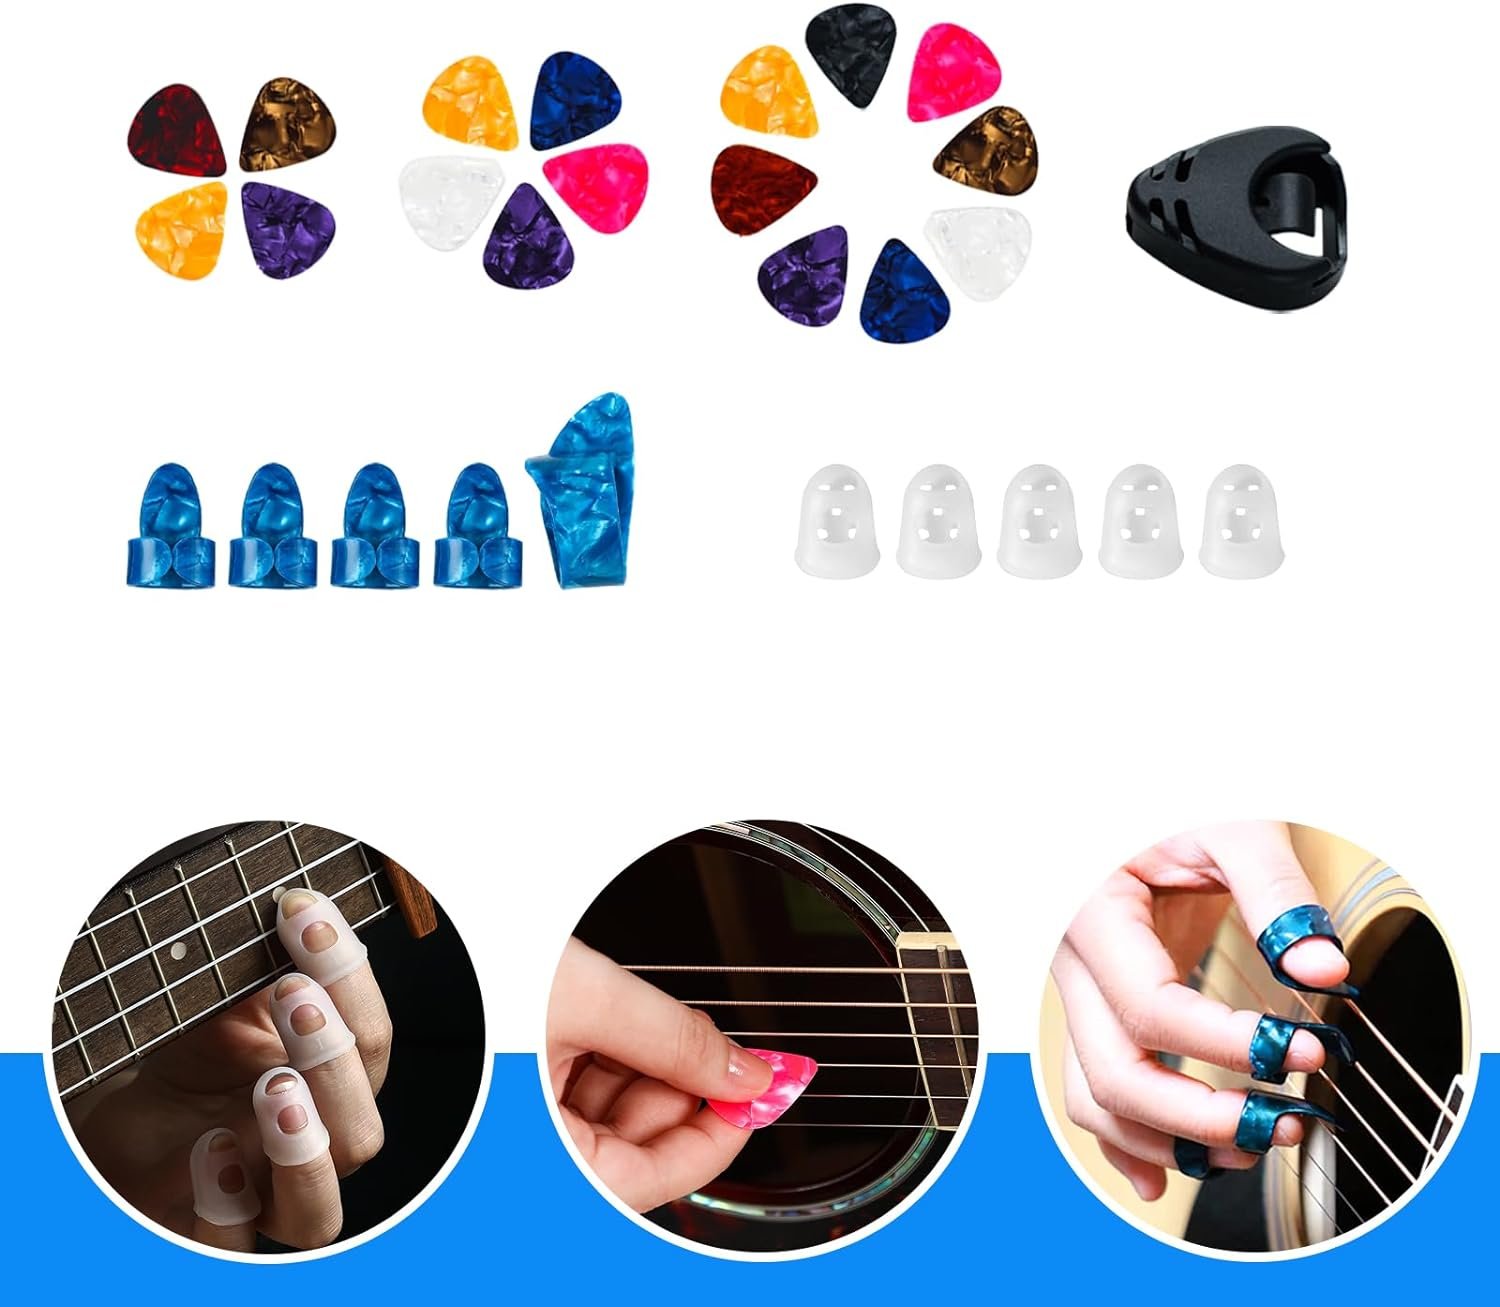 Acoustic Guitar Accessories Kit 68PCS,Including Acoustic Guitar Strings,Guitar Capo,Guitar Picks,Guitar Tuner,Guitar Wall mount,Guitar Bridge pins and other Guitar Accessory